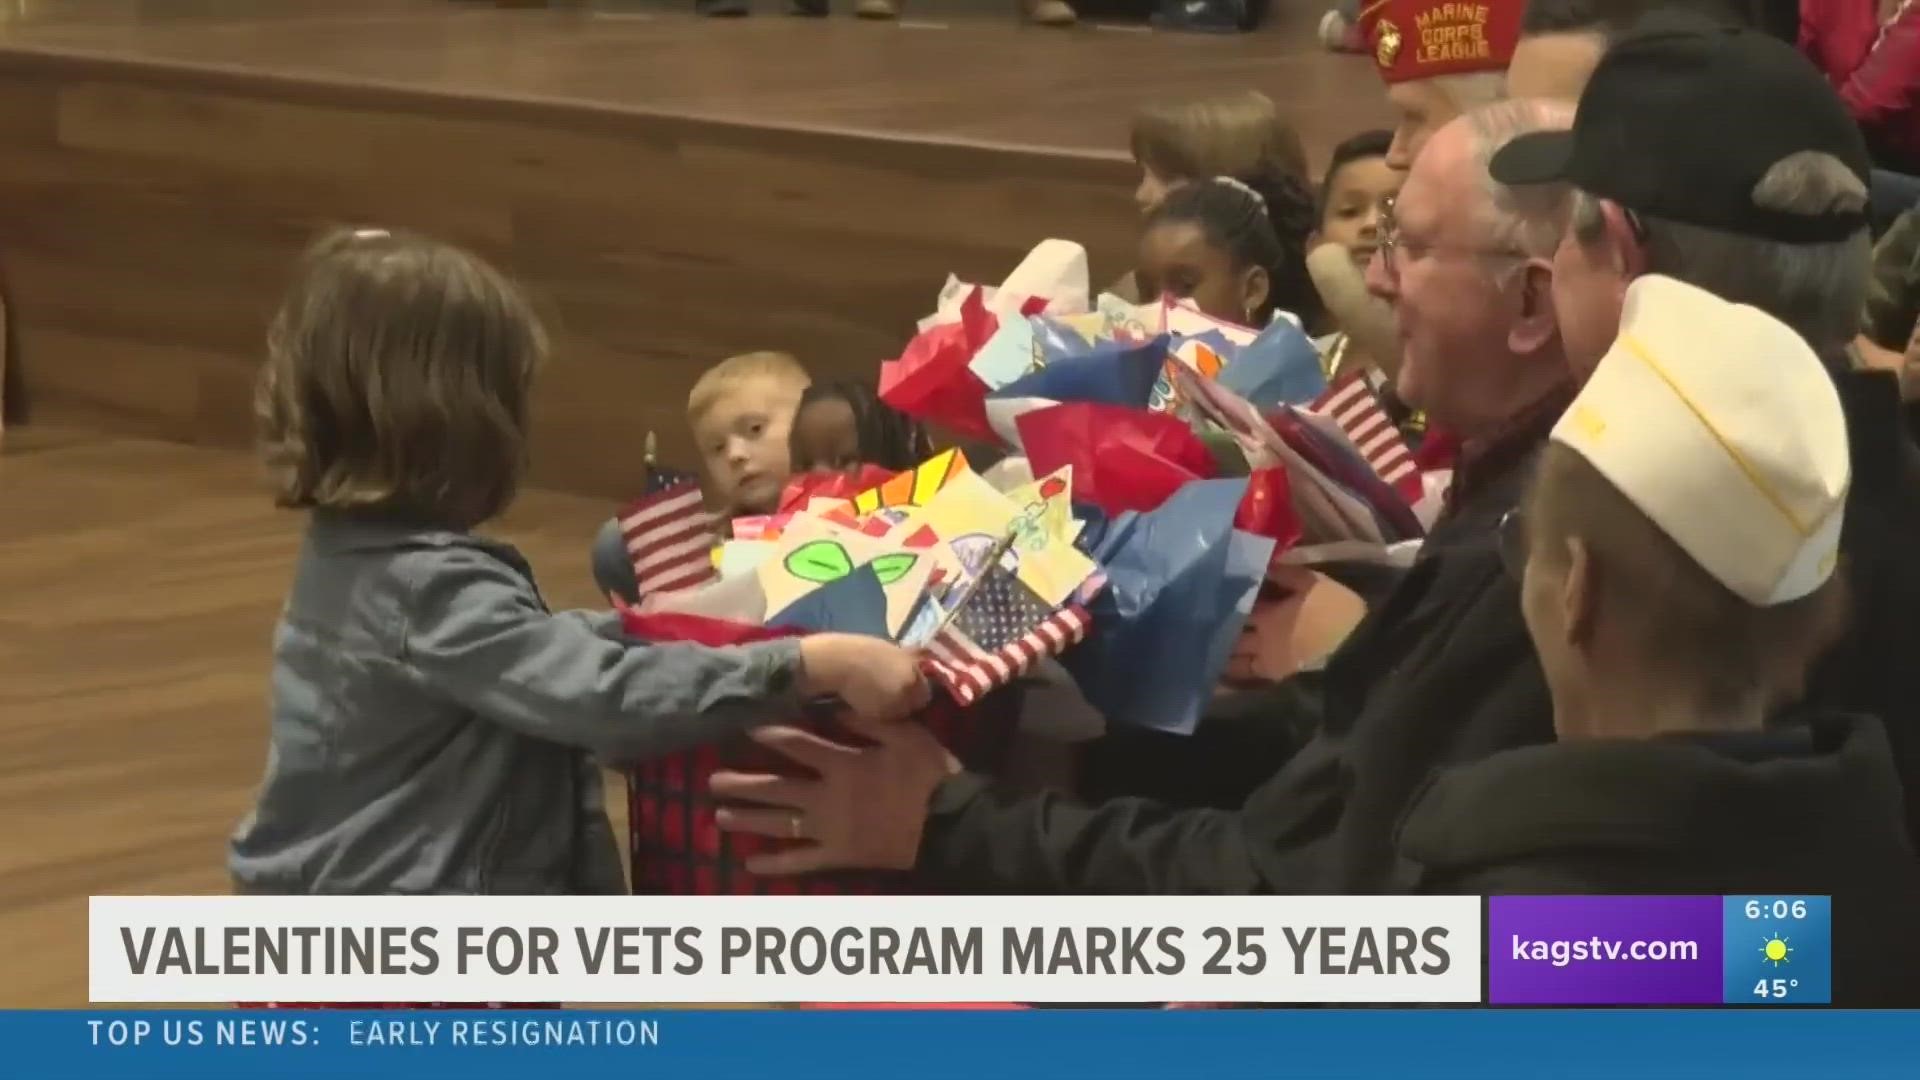 The Valentines for Veterans program has been performed at Sul Ross Elementary for 25 years.